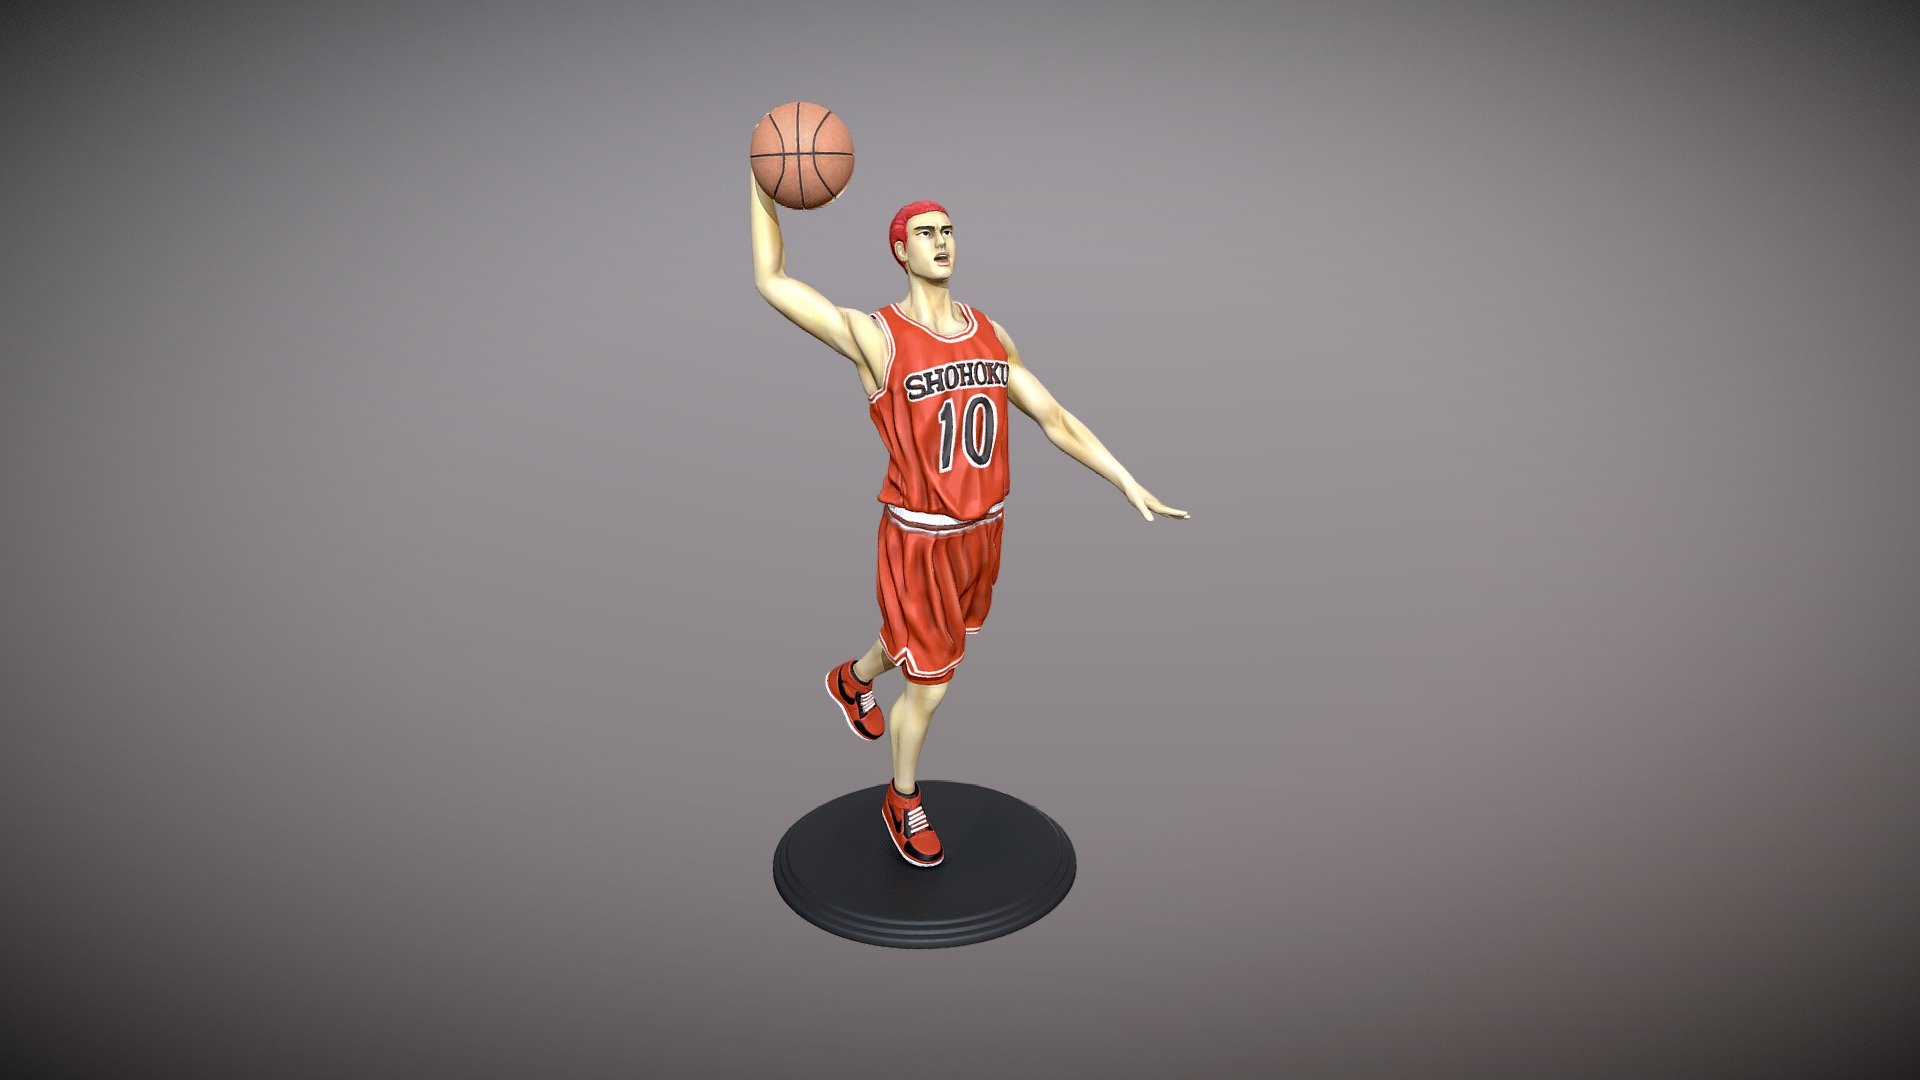 Hanamichi Sakuragi Figure manga anime Slam Dunk 3D print model

This digital sculpture was made in zbrush and exported to stl format and with the aim of being a model for 3D printing. Represents Hanamichi Sakuragi from the anime manga Slam Dunk.

A file is provided in zip format with the separate parts of the body and a file with the figure in one piece 3d model